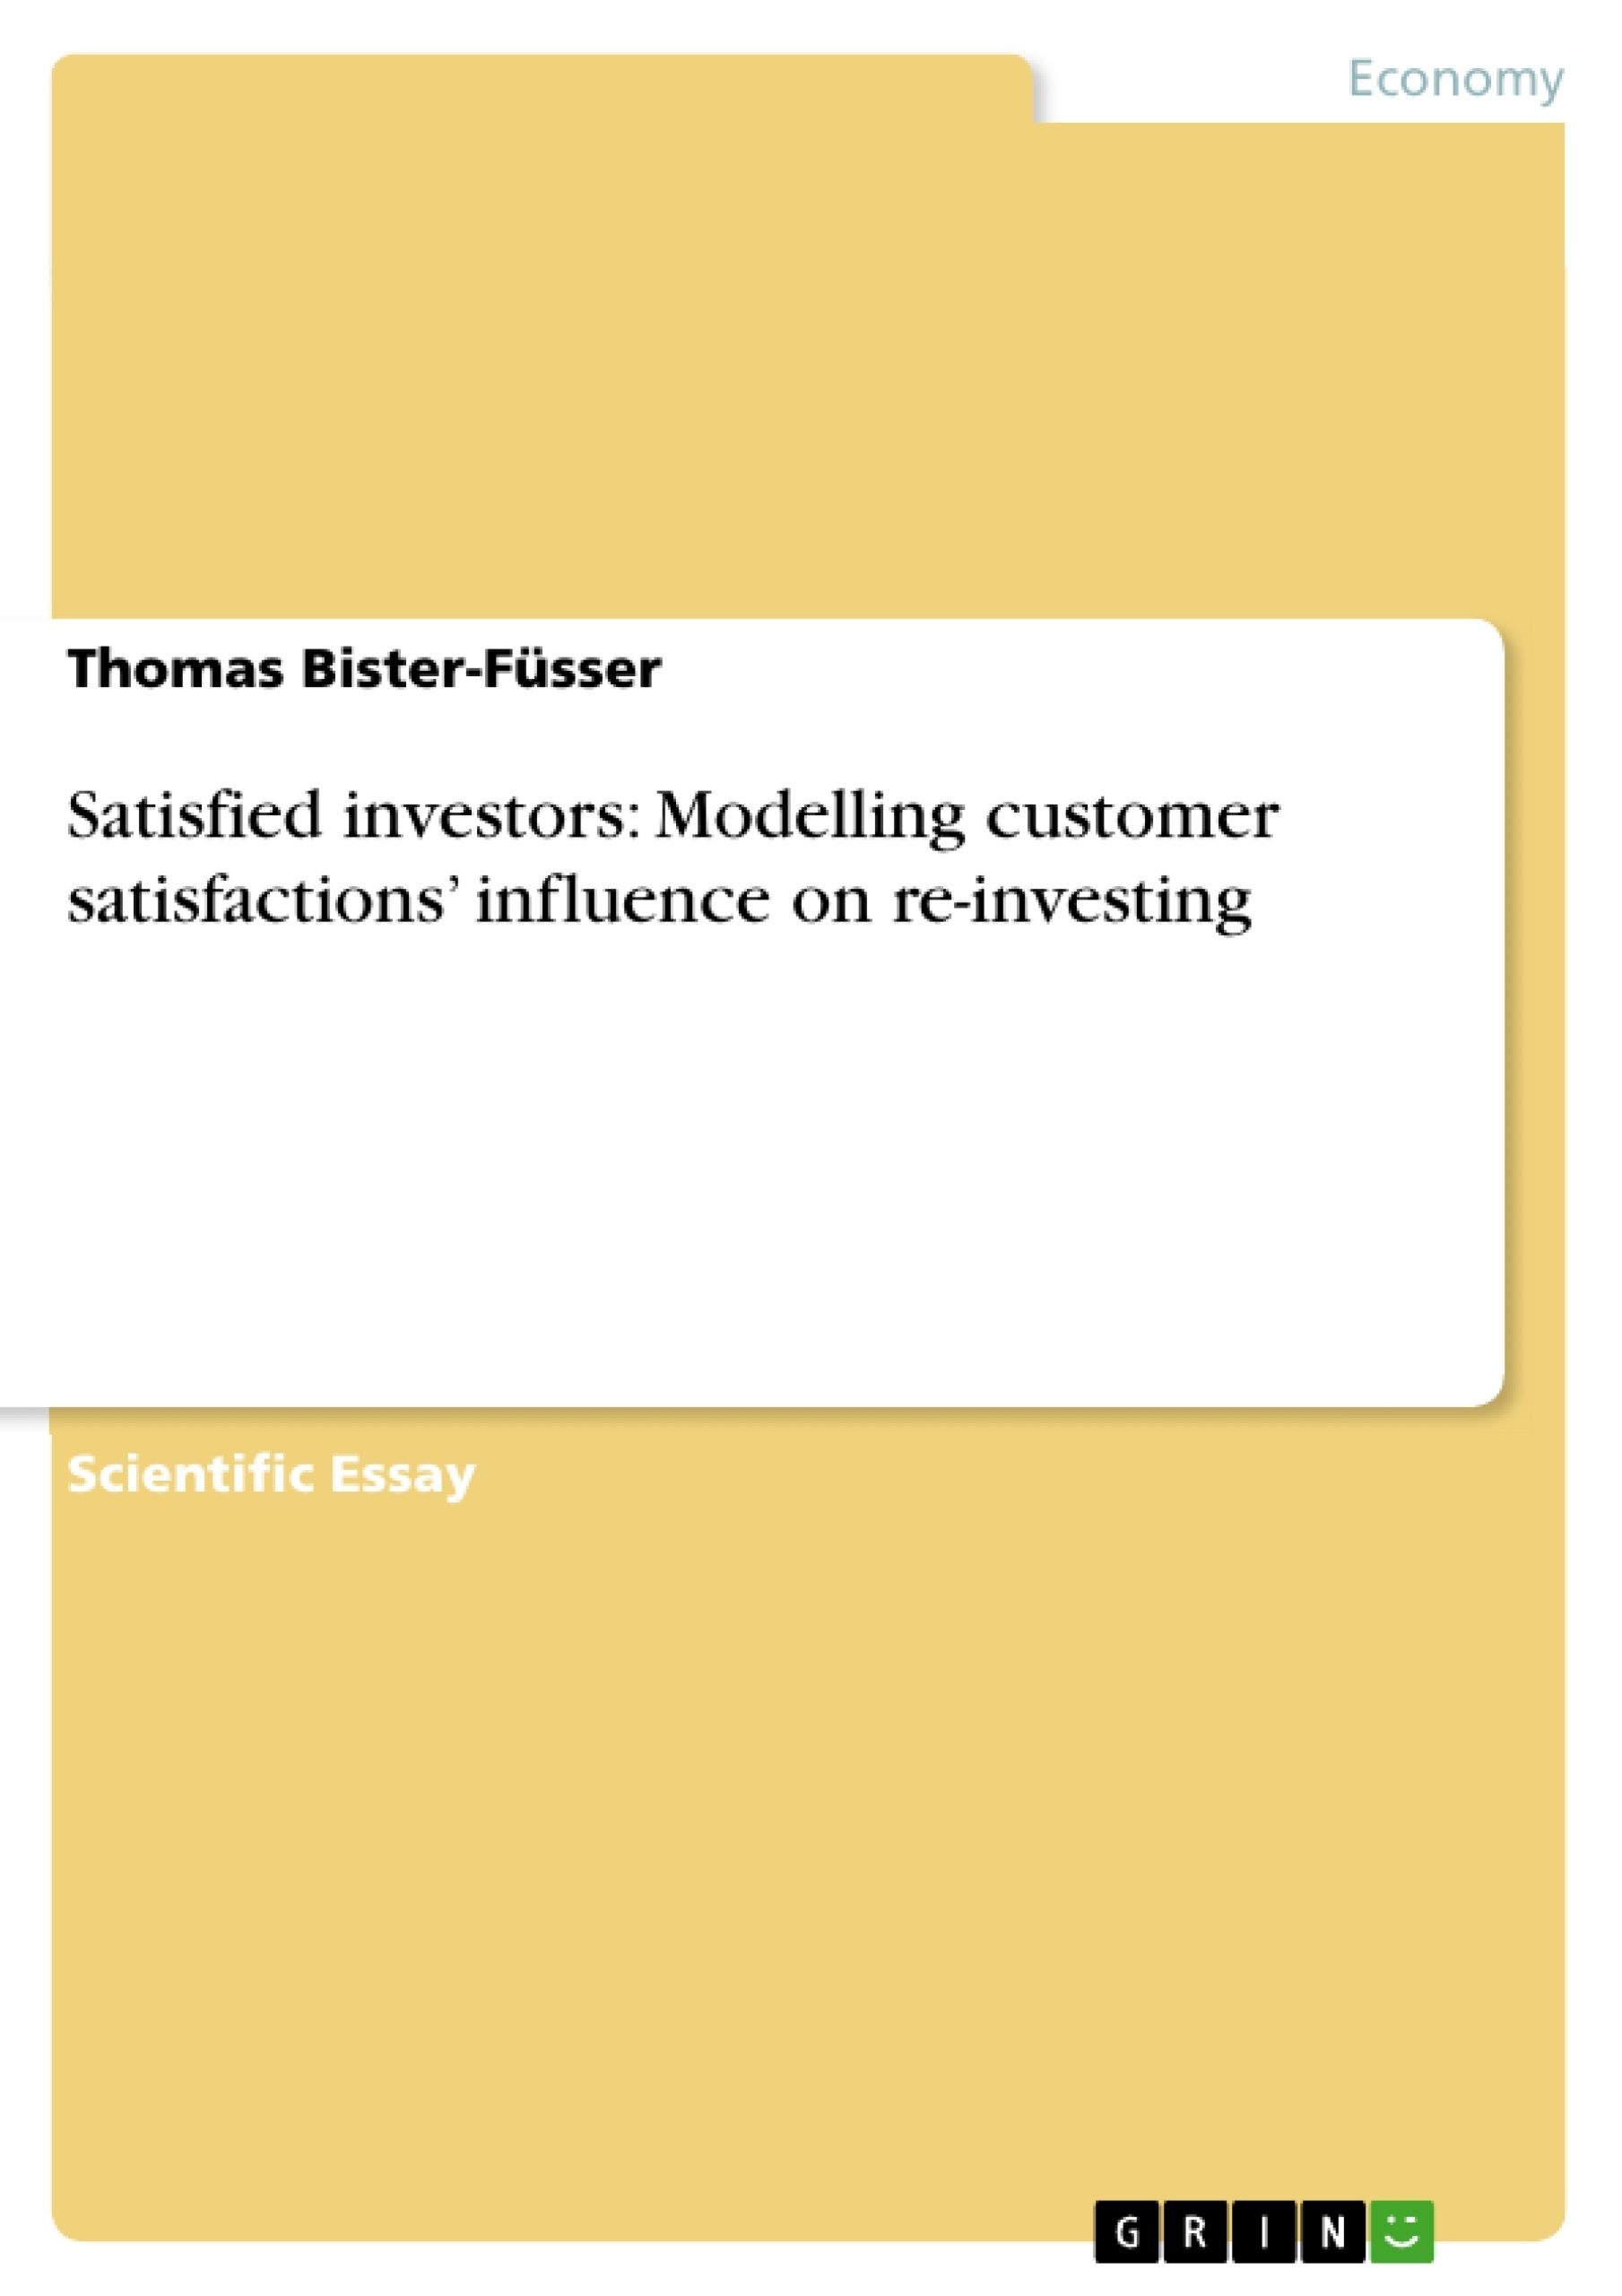 Título: Satisfied investors: Modelling customer satisfactions’ influence on re-investing